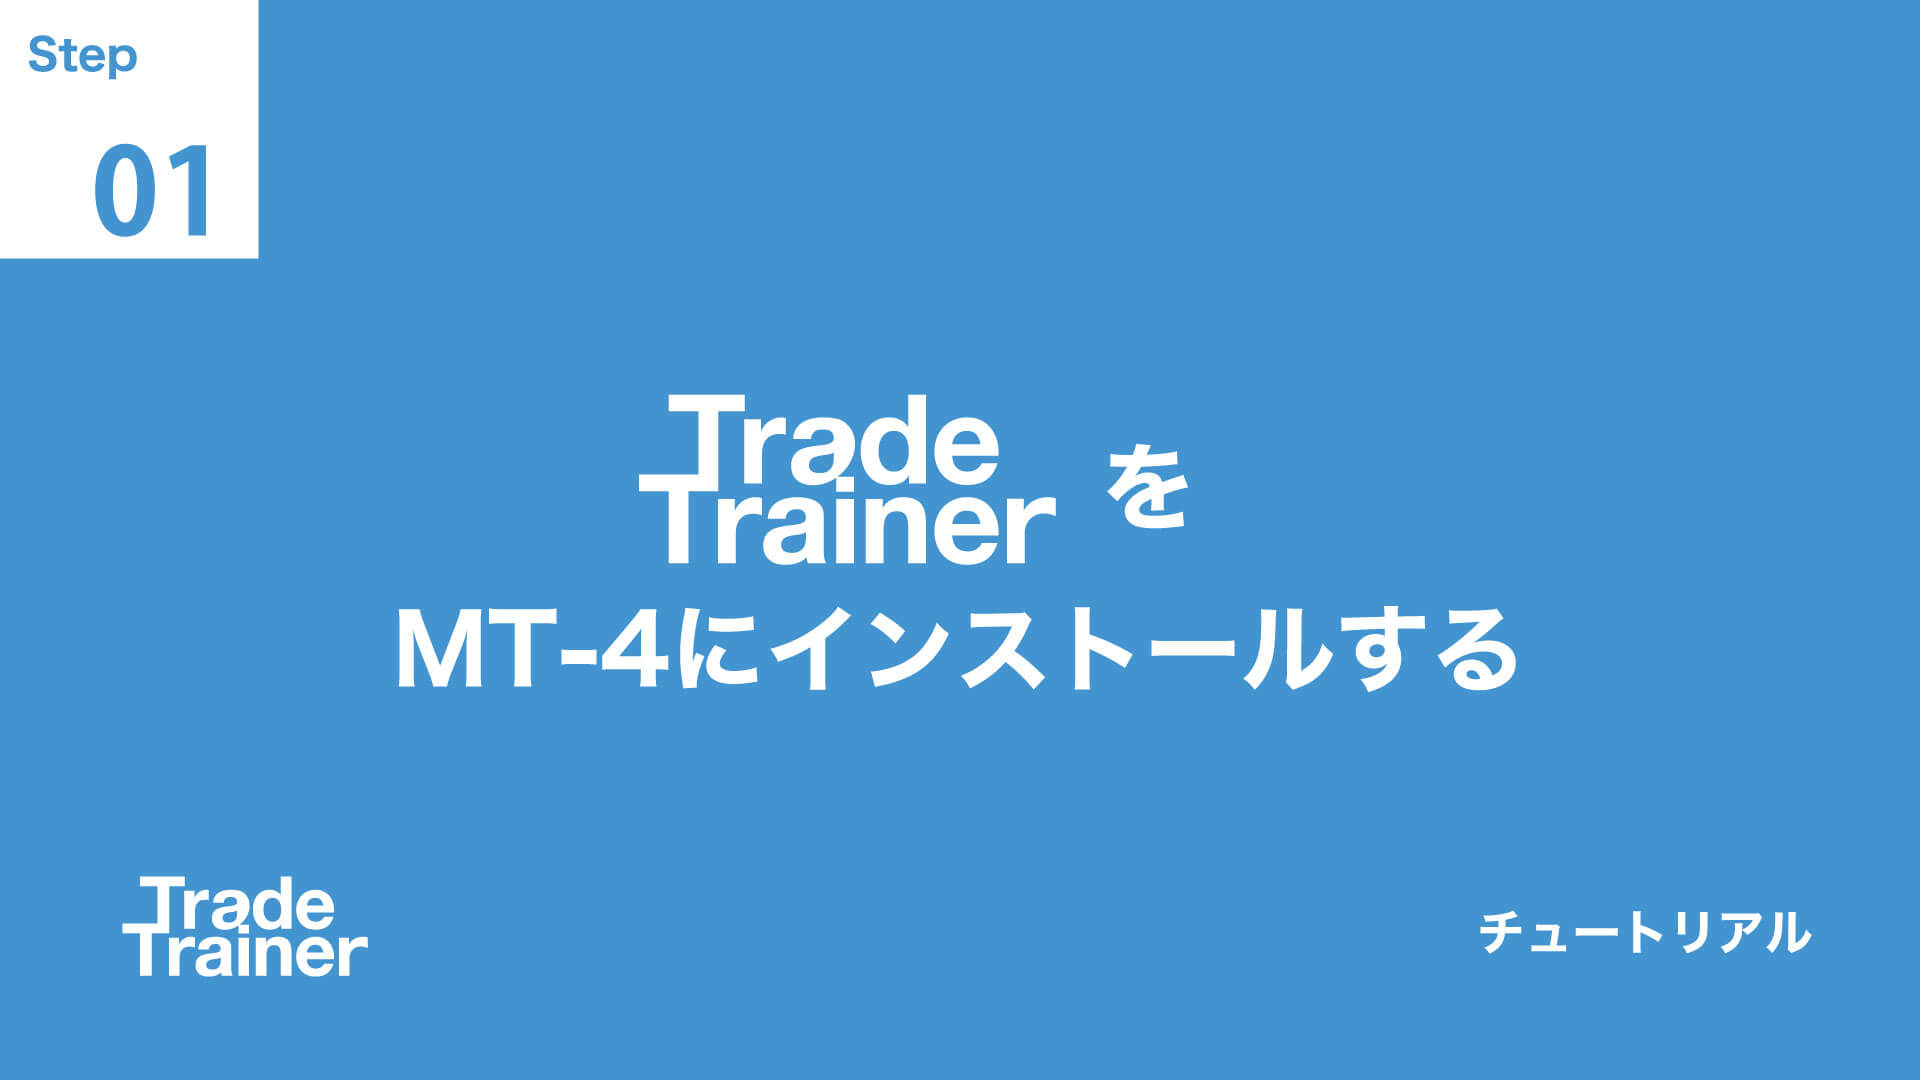 Trade Trainer Step1